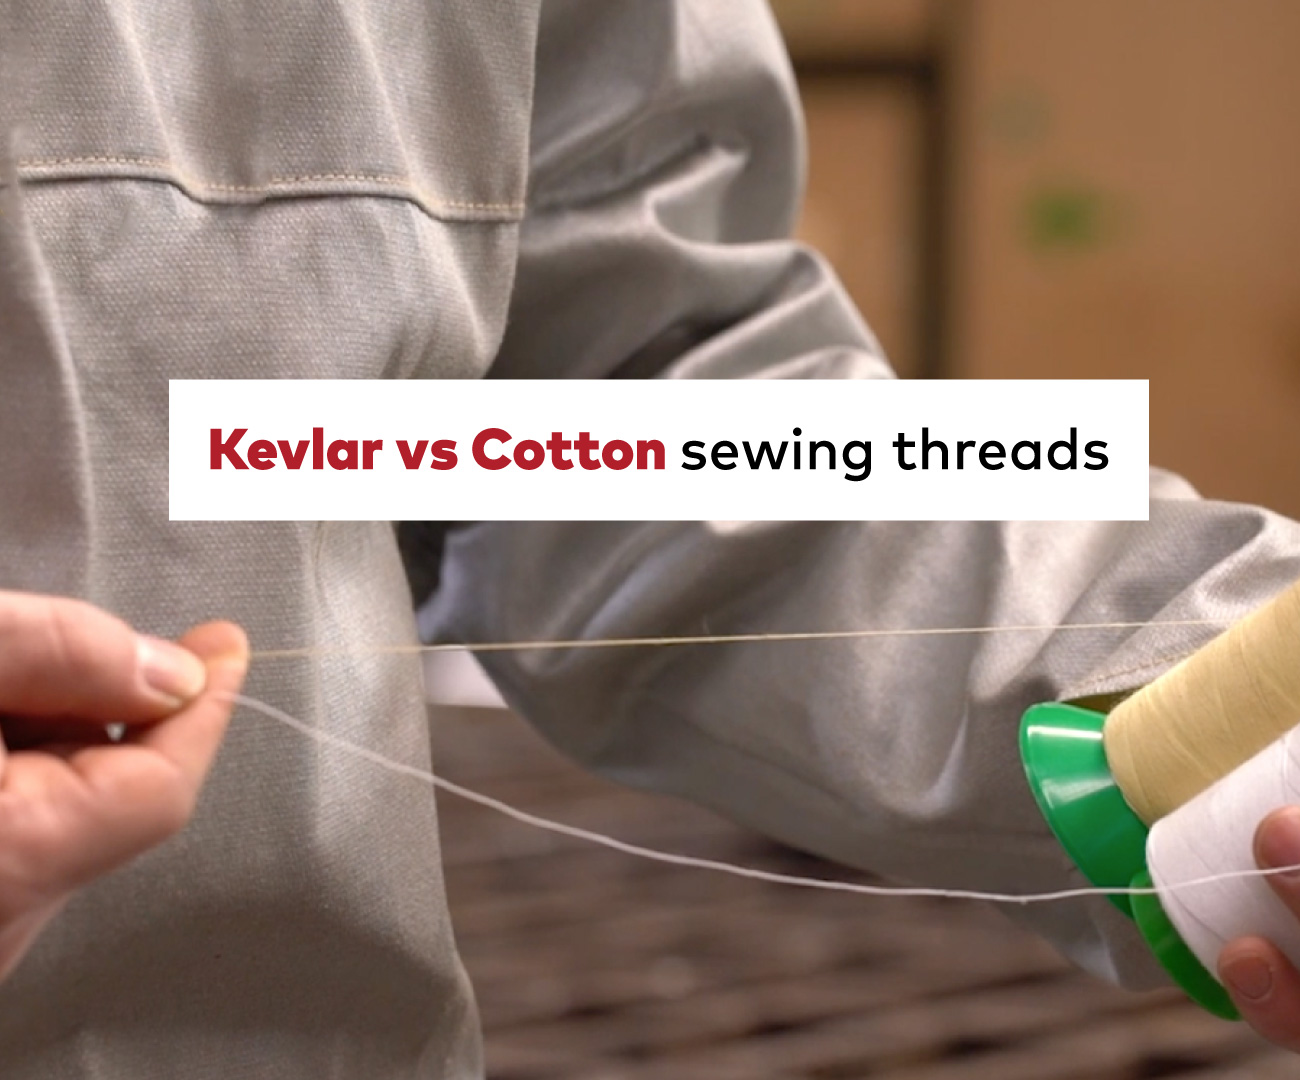 Kevlar thread, that’s why it makes heat-resistant and welding gloves protective and durable